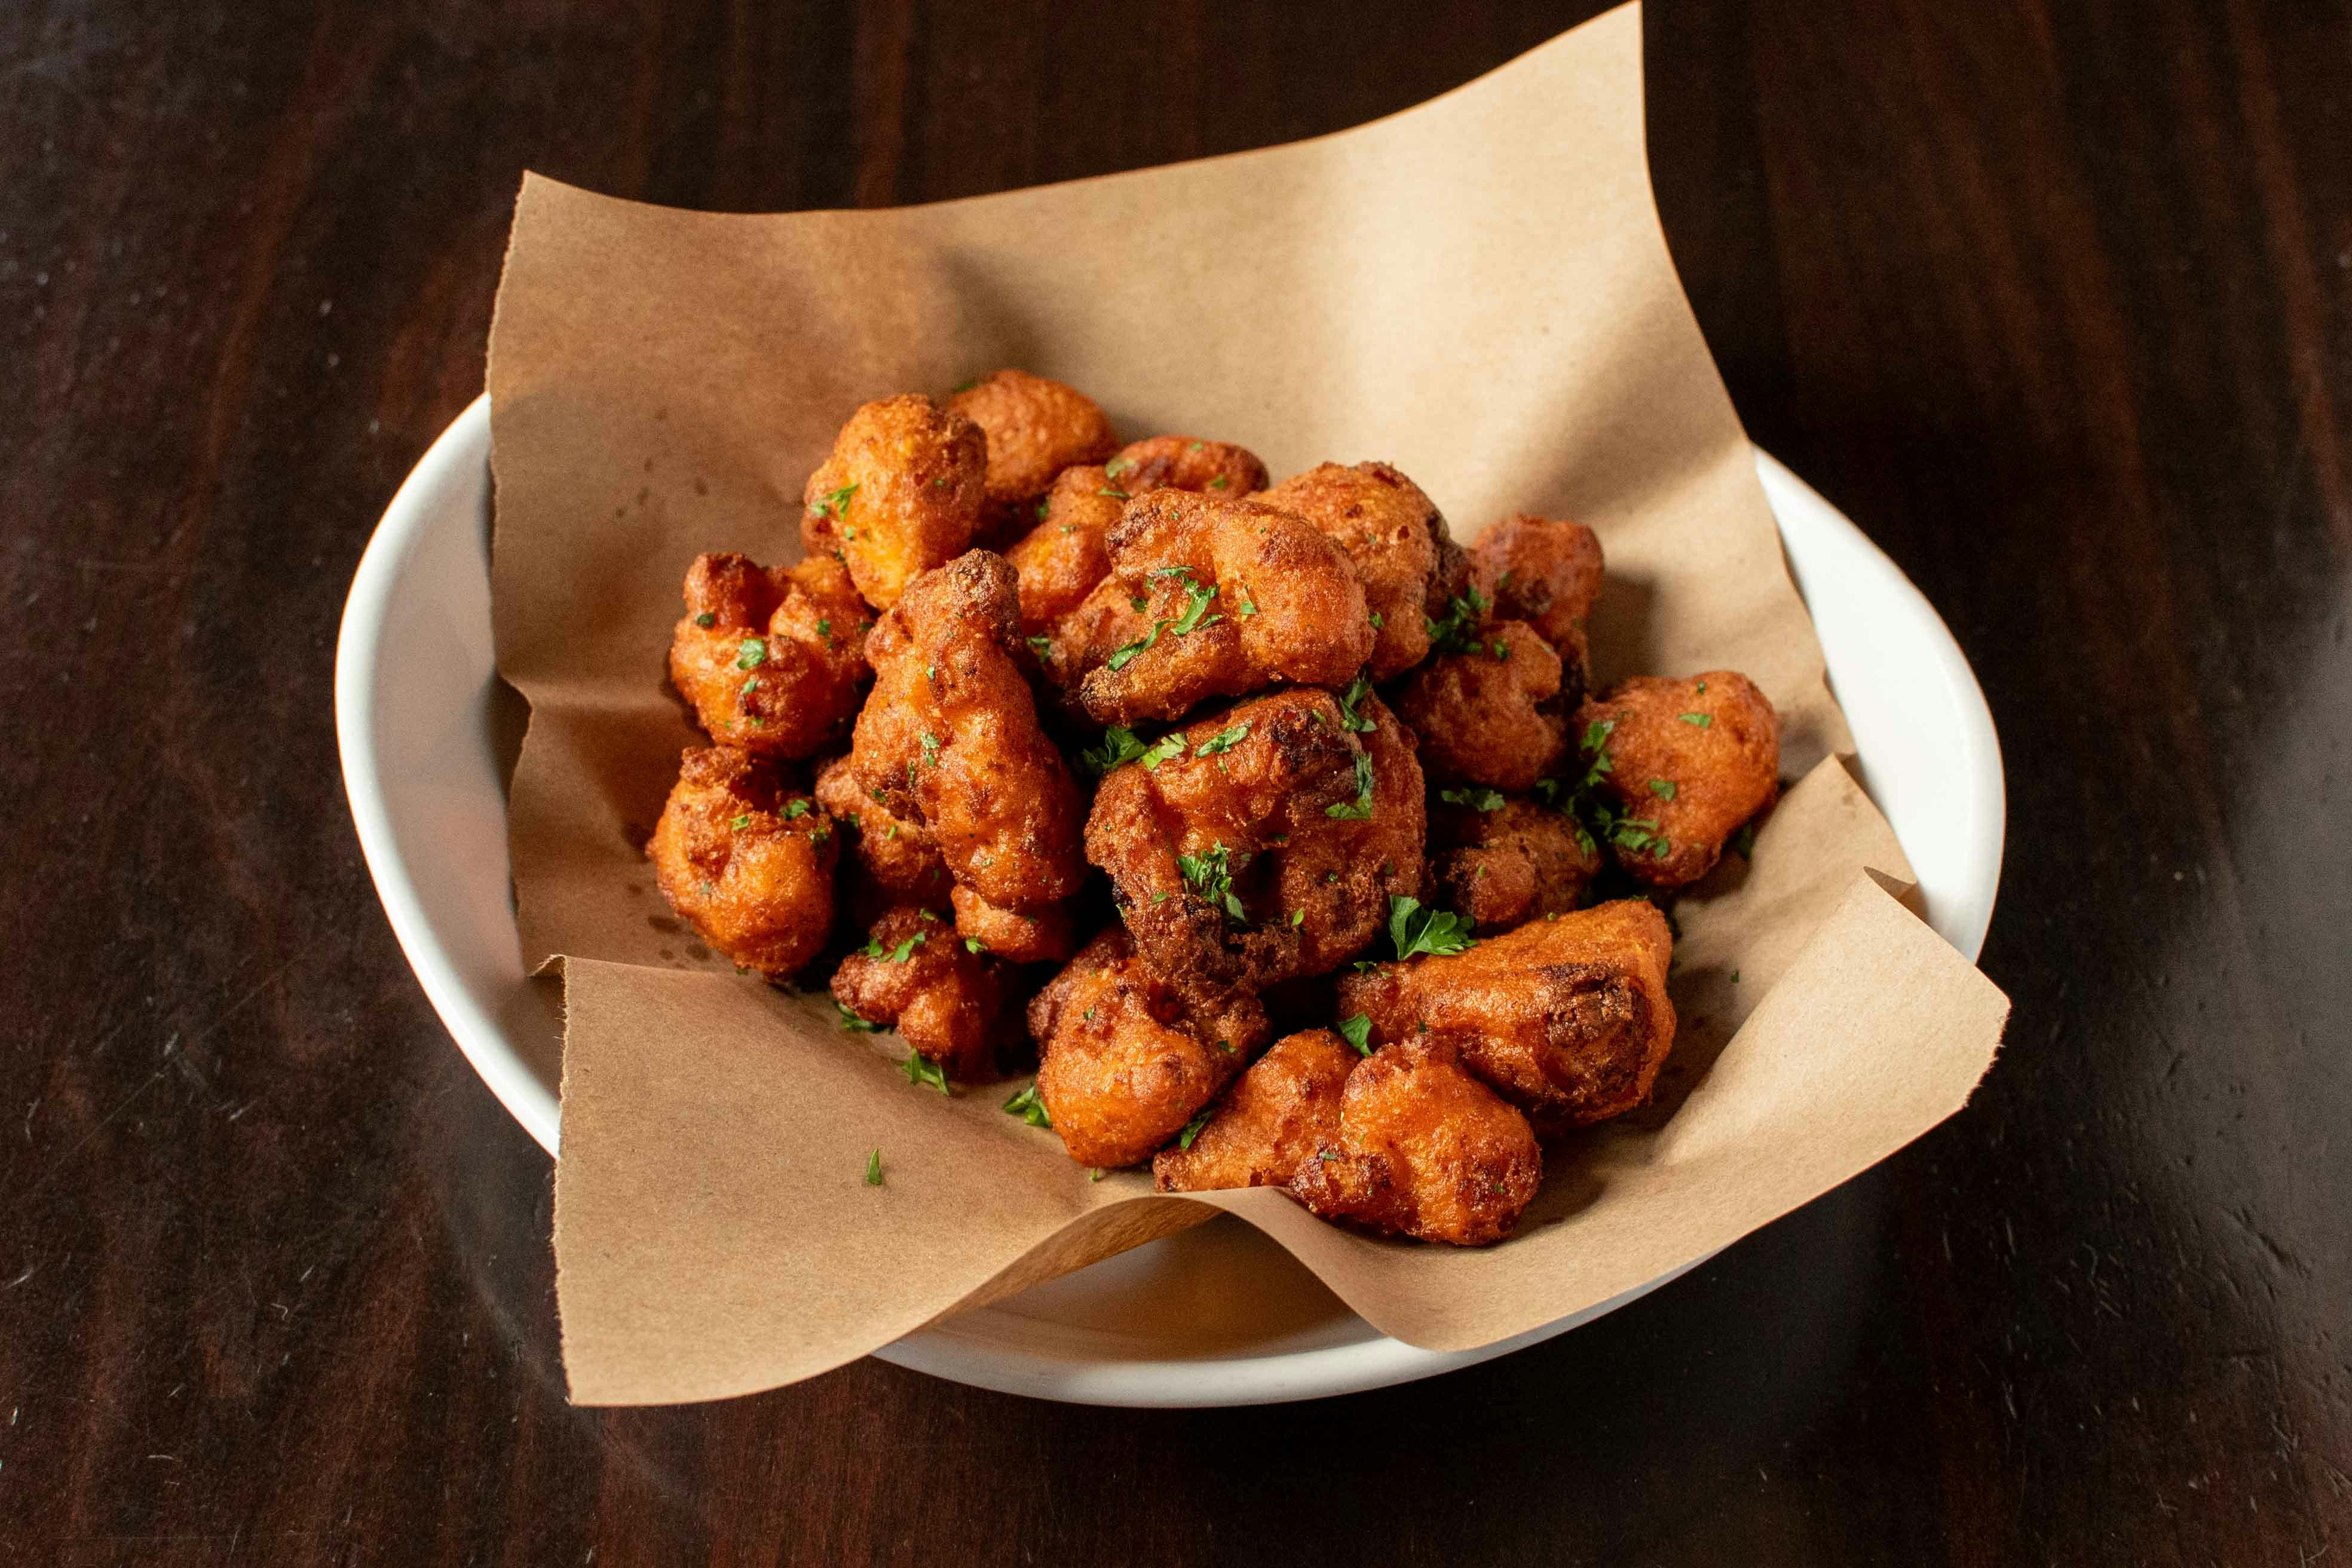 Fried Cauliflower Bites from Midcoast Wings - E College Ave in Appleton, WI